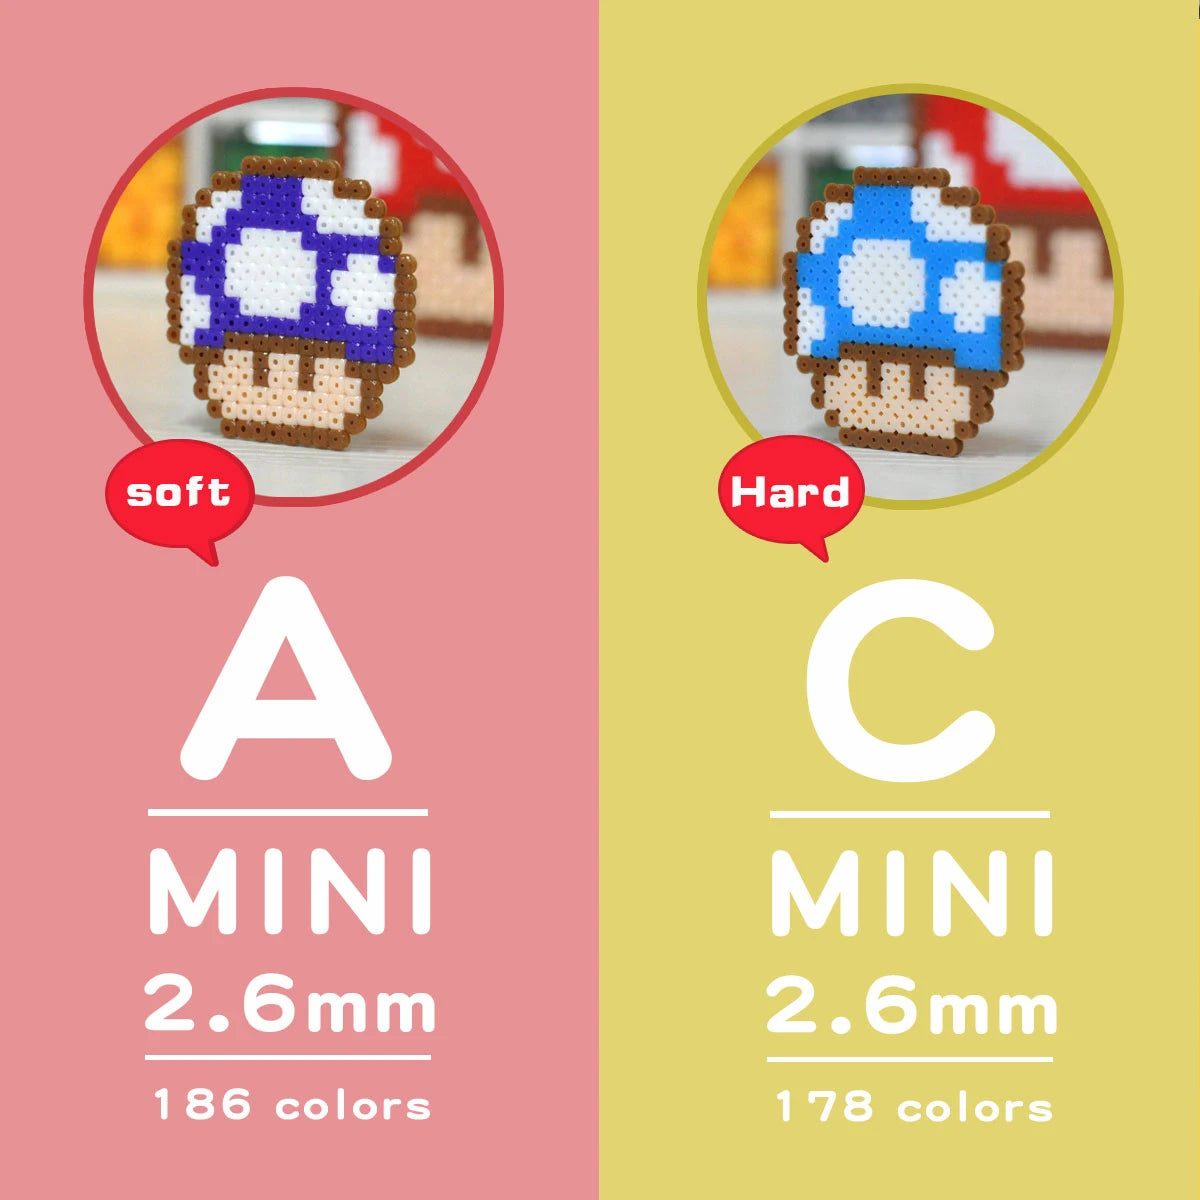 What's the difference between A-2.6mm and C-2.6mm Mini Artkal